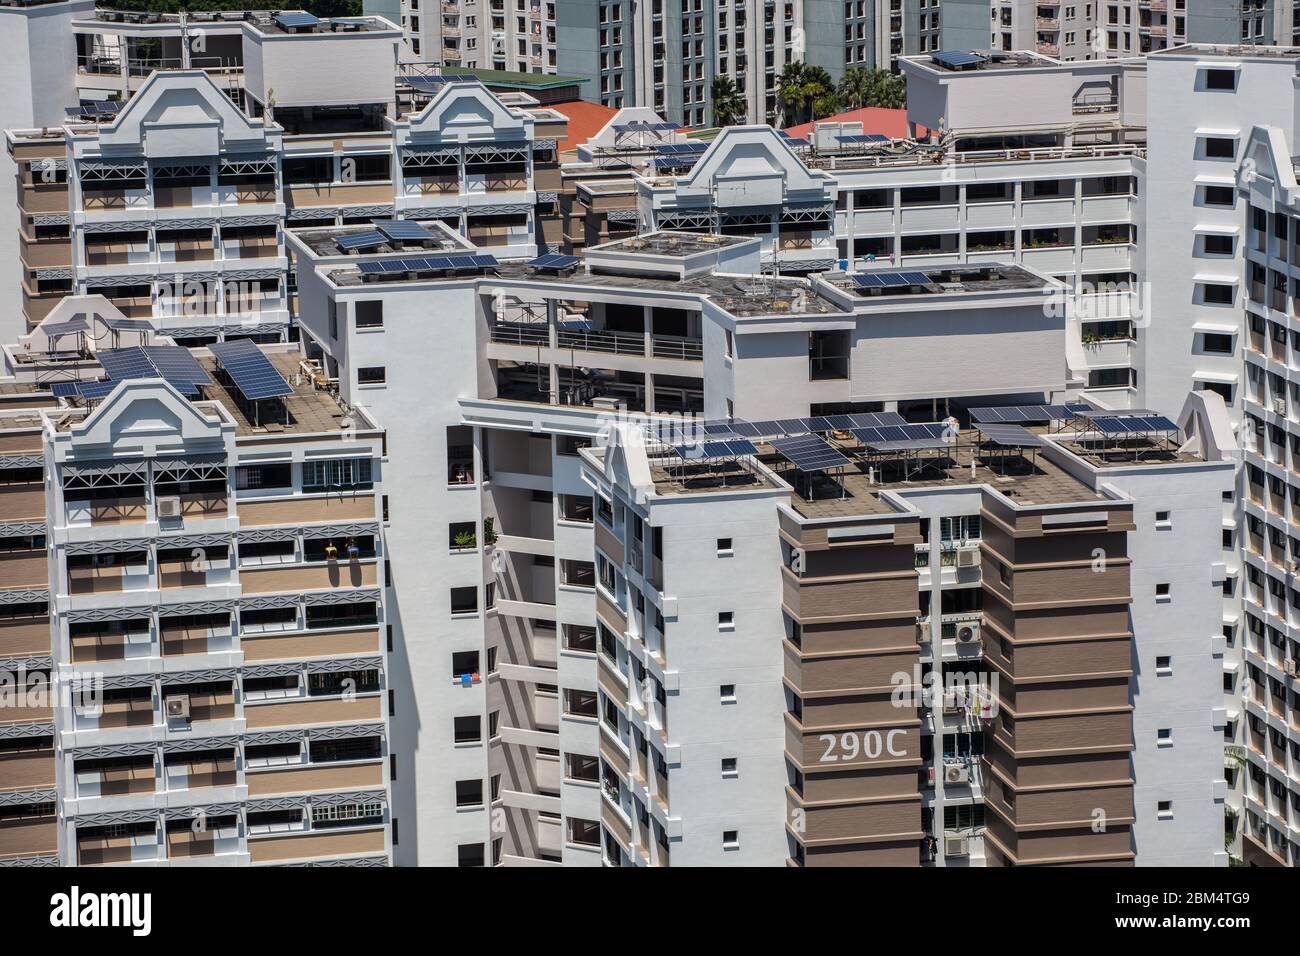 Aerial view of solar panels installed on housing estates rooftops to convert natural sunlight to solar energy to electricity usage, Singapore. Stock Photo